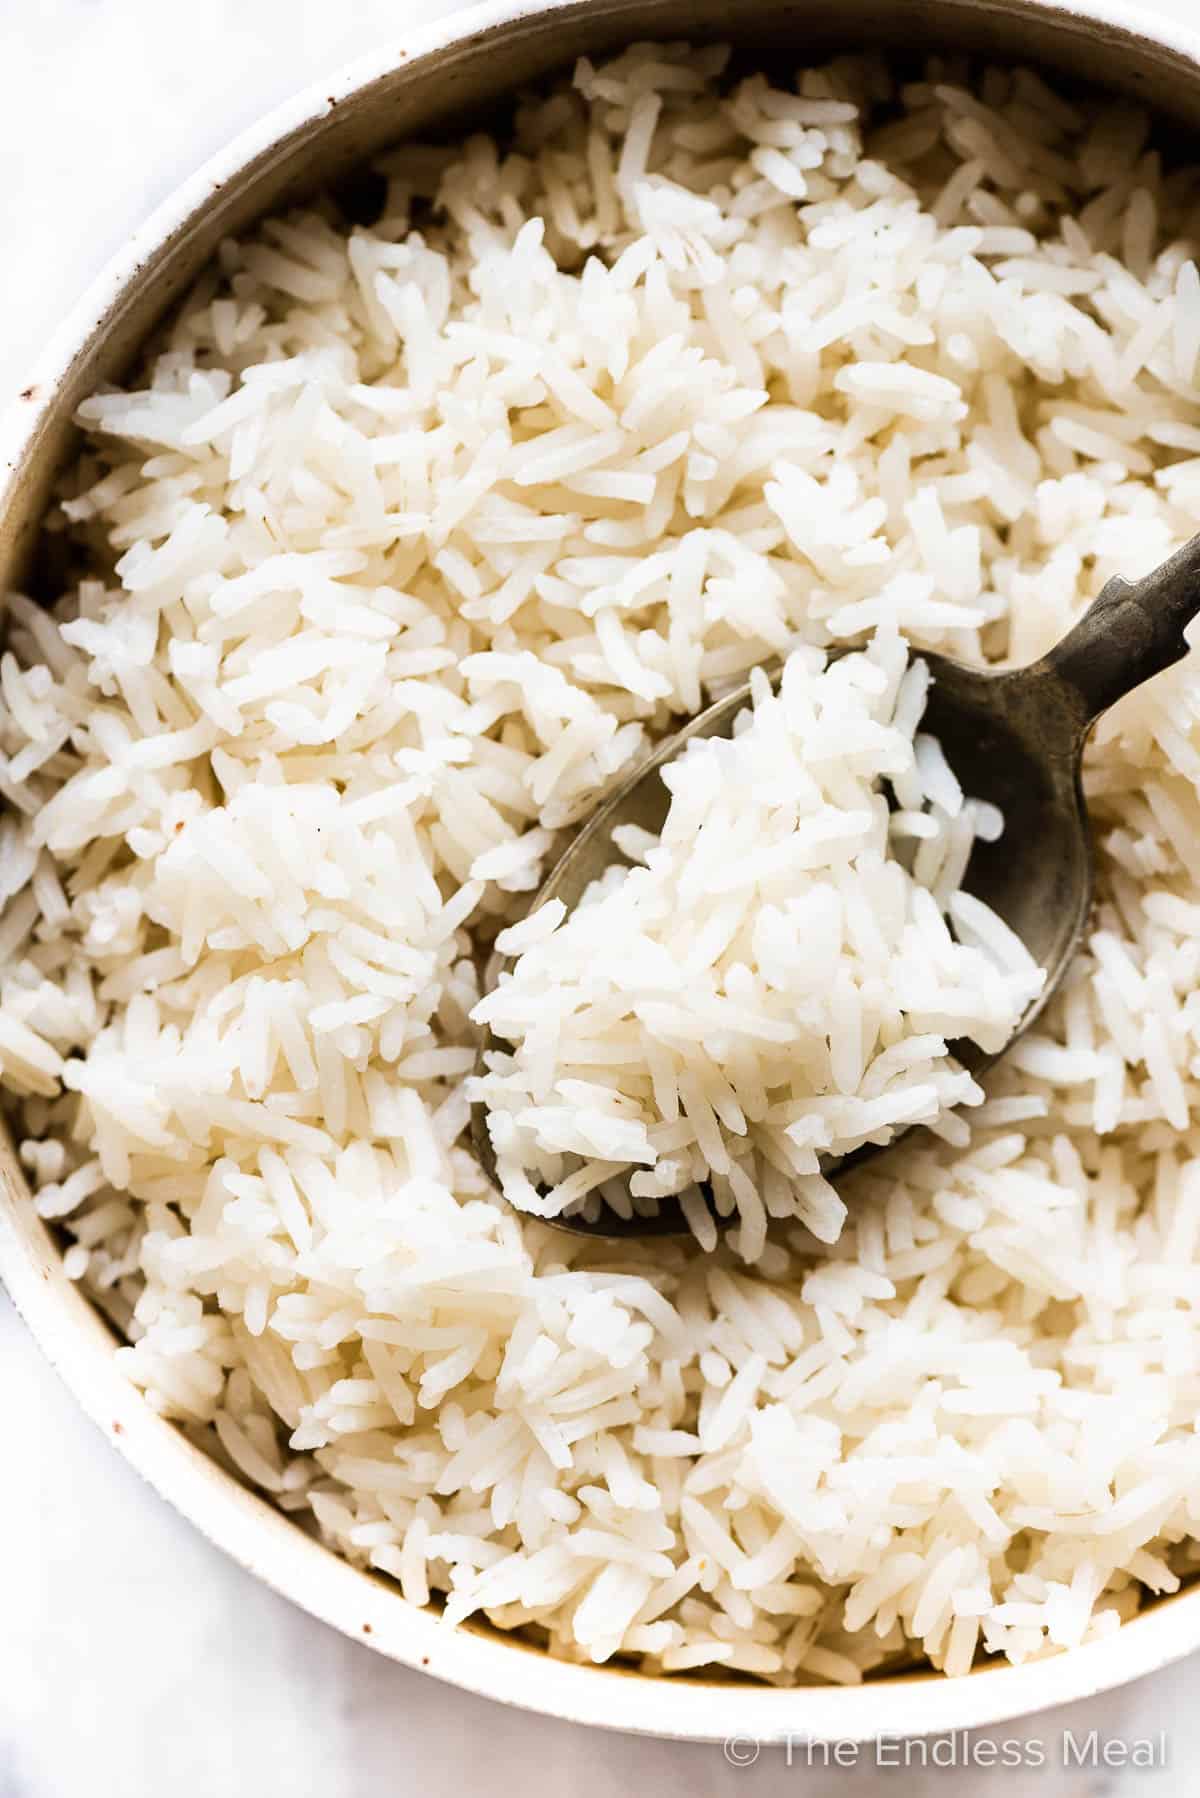 How To Cook Basmati Rice Perfect Basmati Rice The Endless Meal